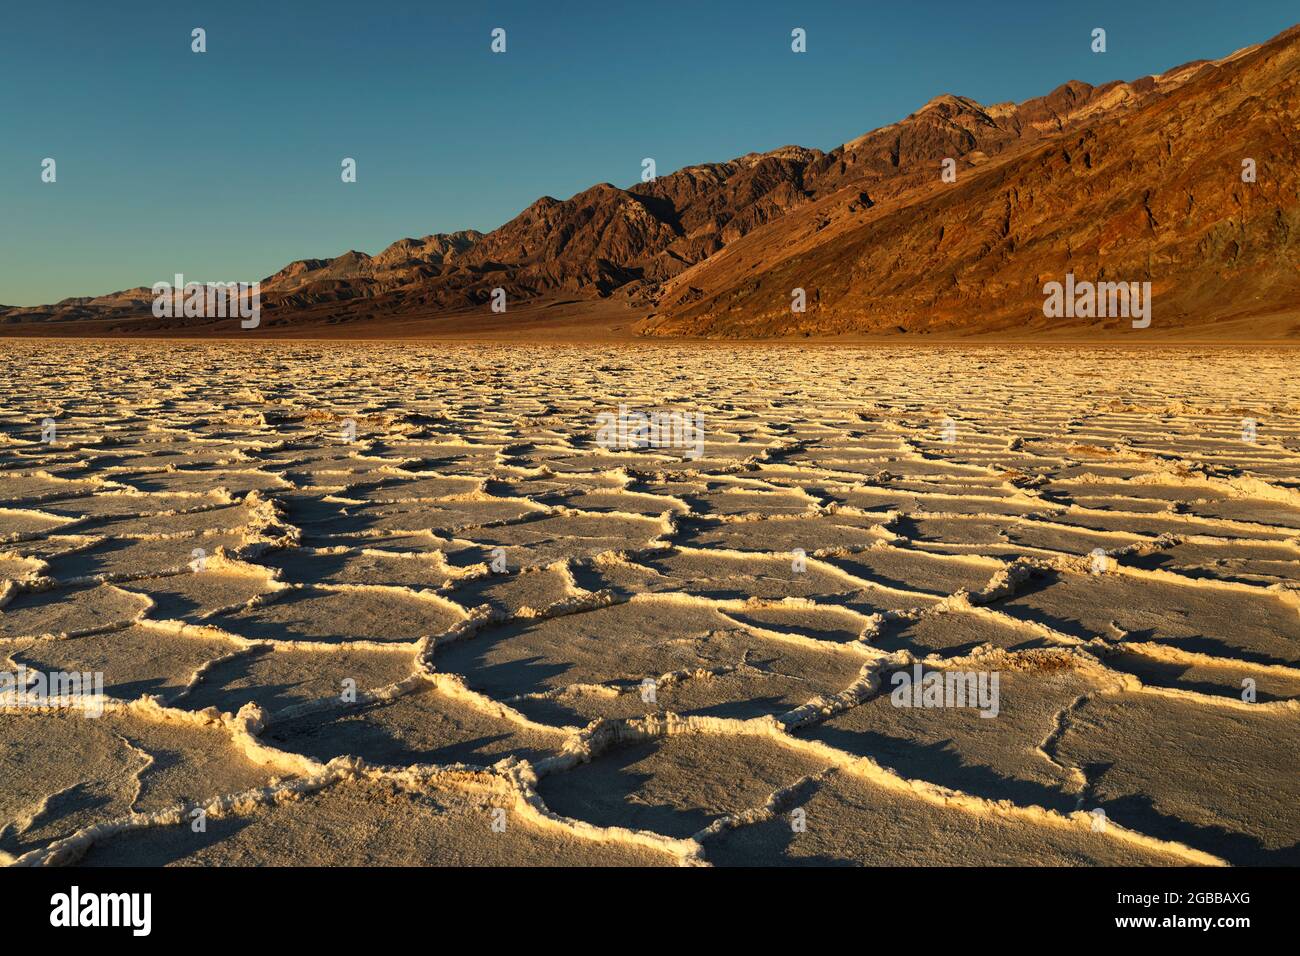 Badwater Basin at sunset, Death Valley National Park, California, United States of America, North America Stock Photo